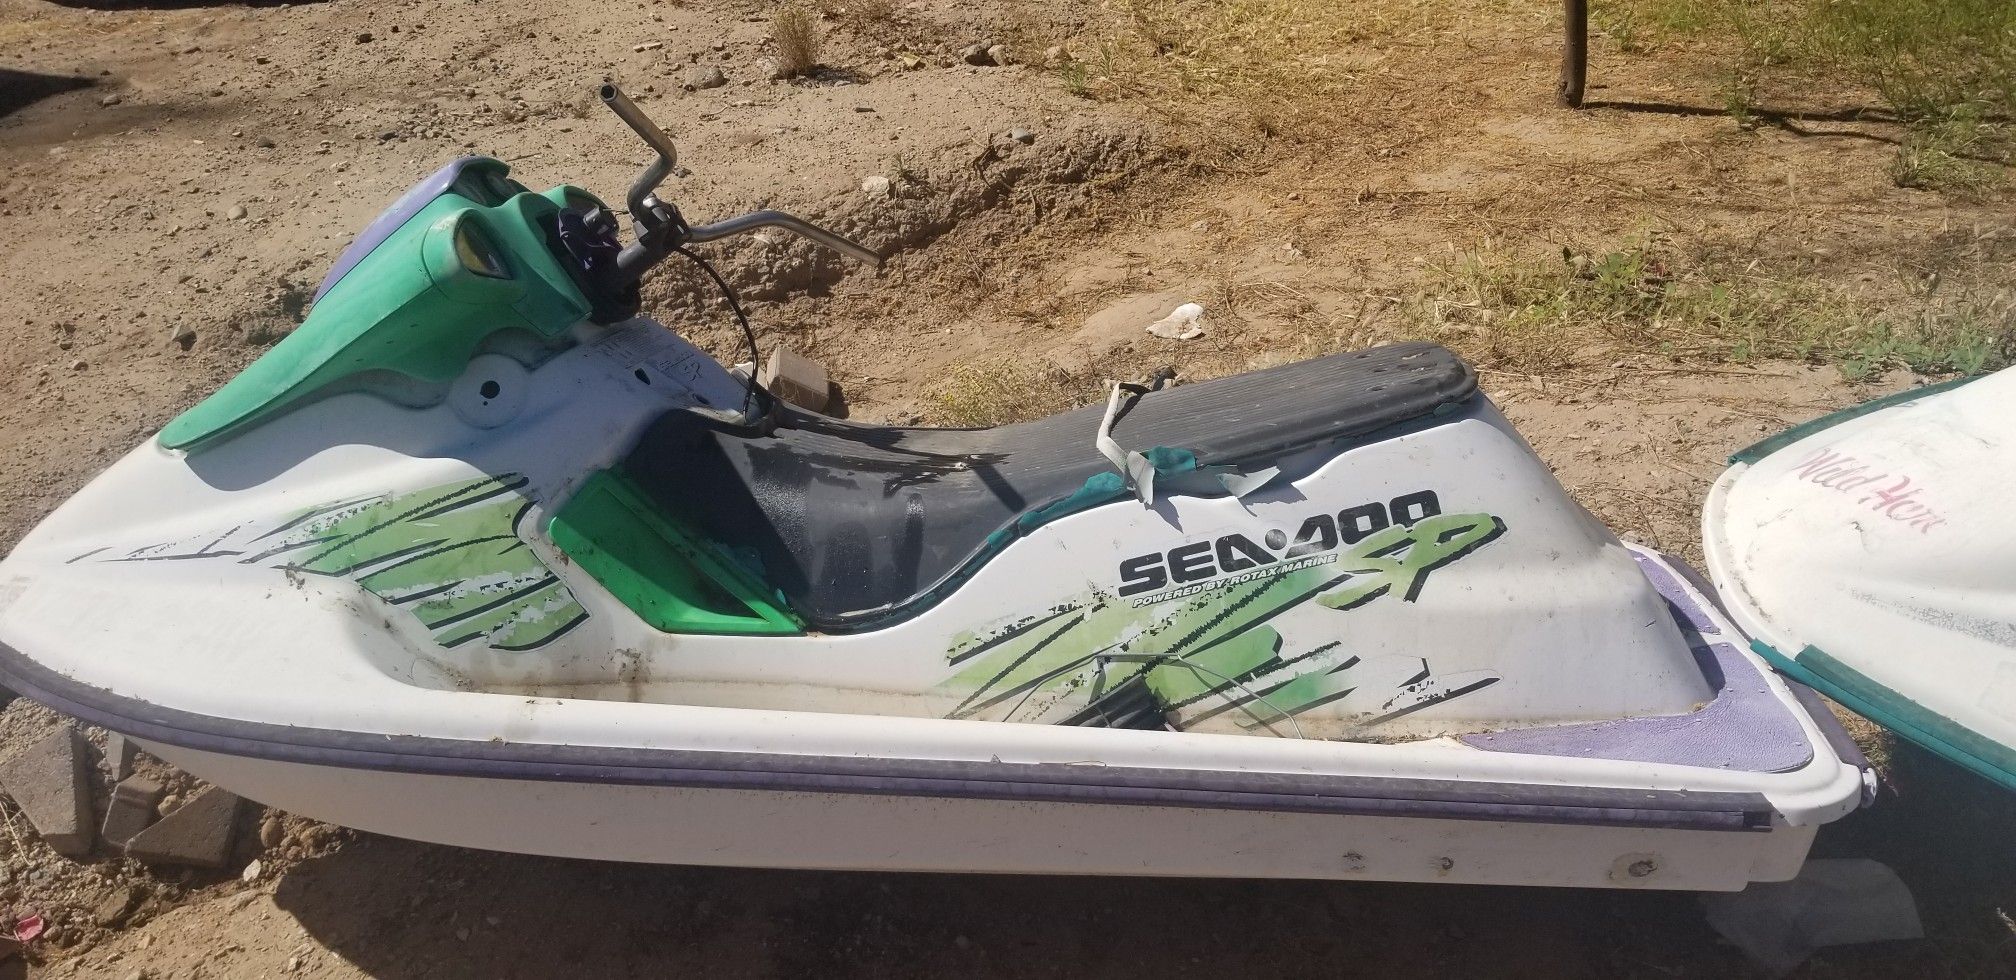 Seadoo SP for free